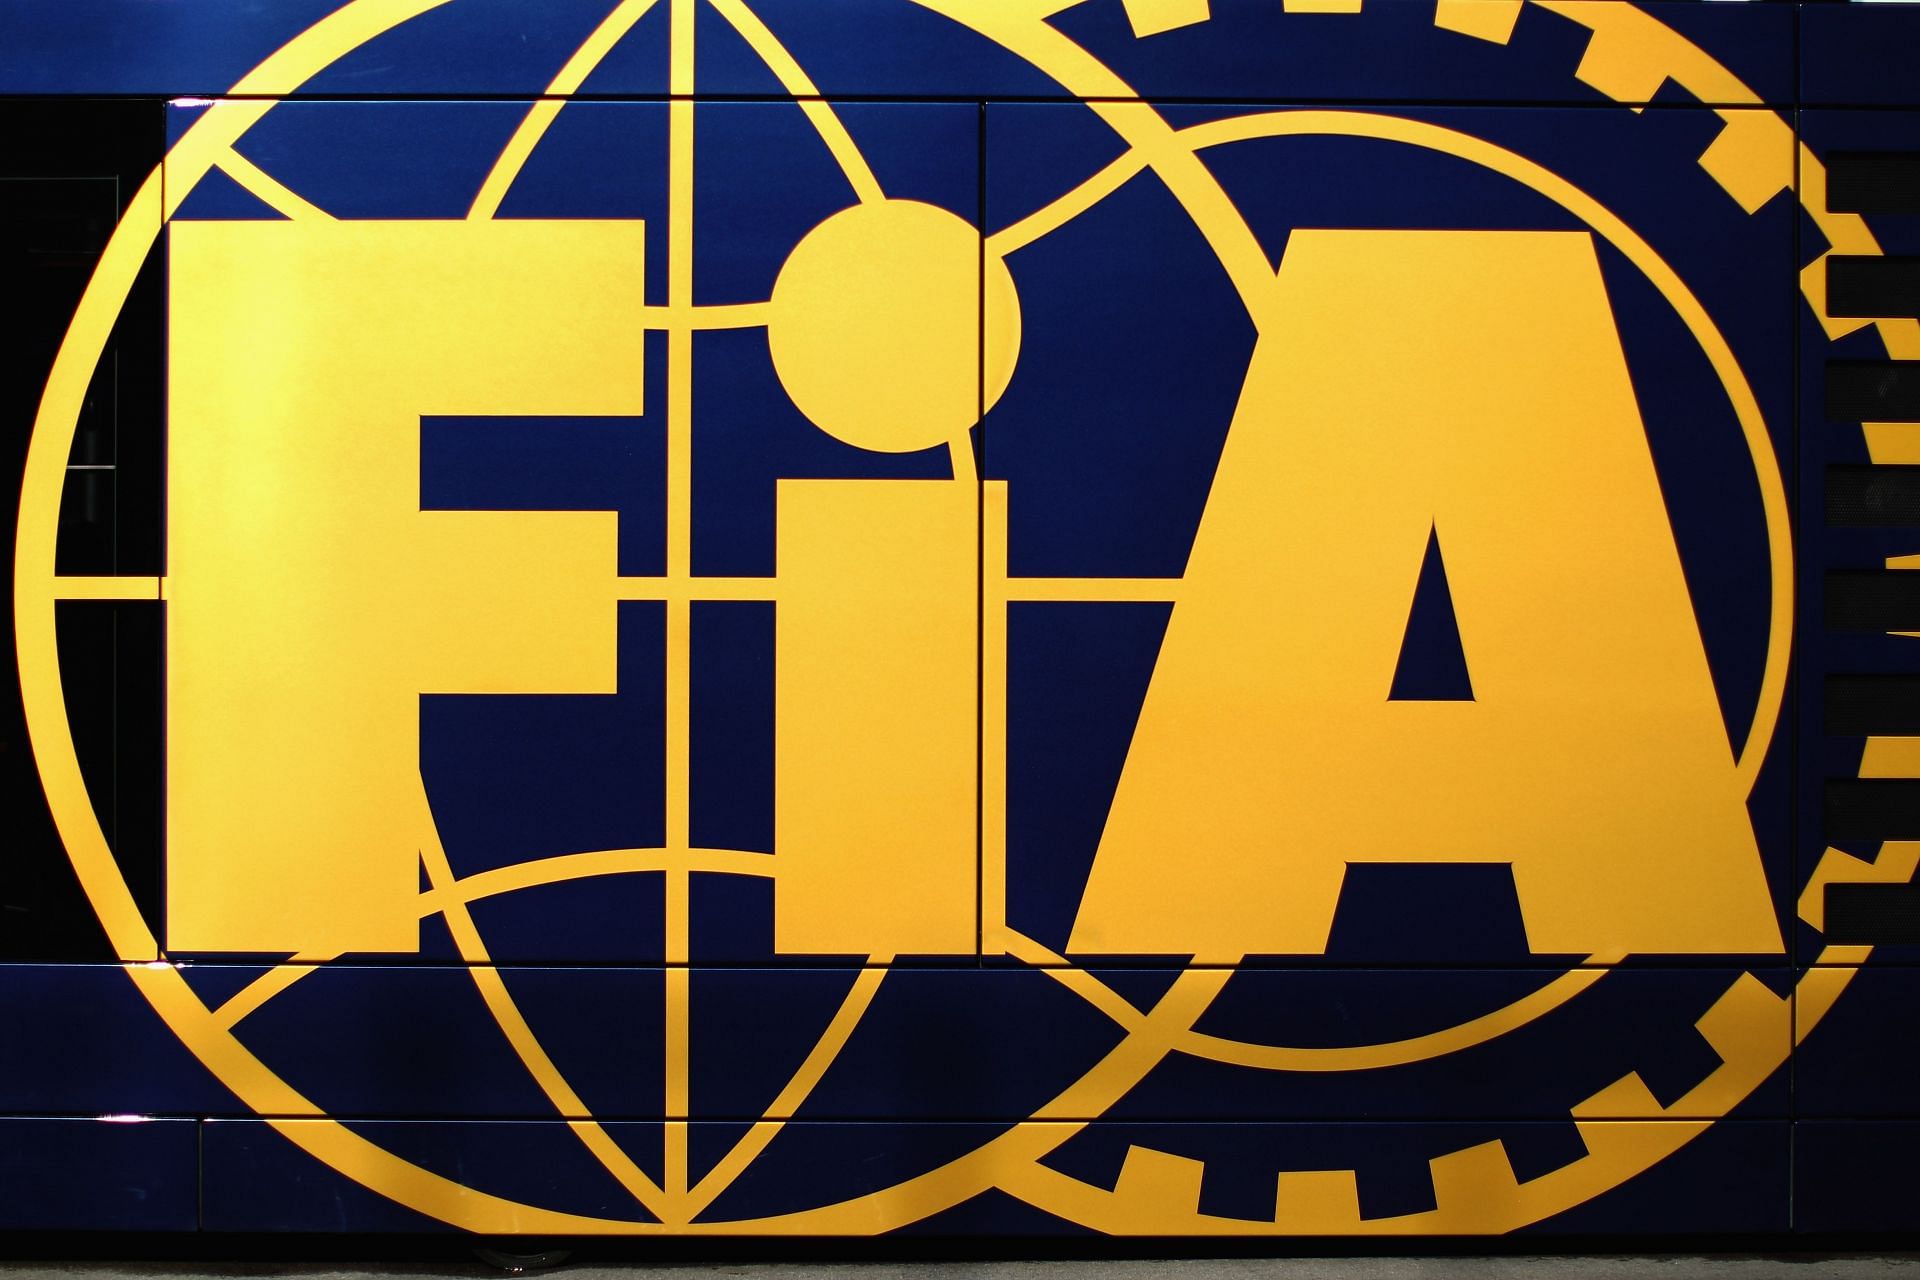 Detail of the FIA logo is seen during practice for the Turkish Grand Prix (Photo by Mark Thompson/Getty Images)